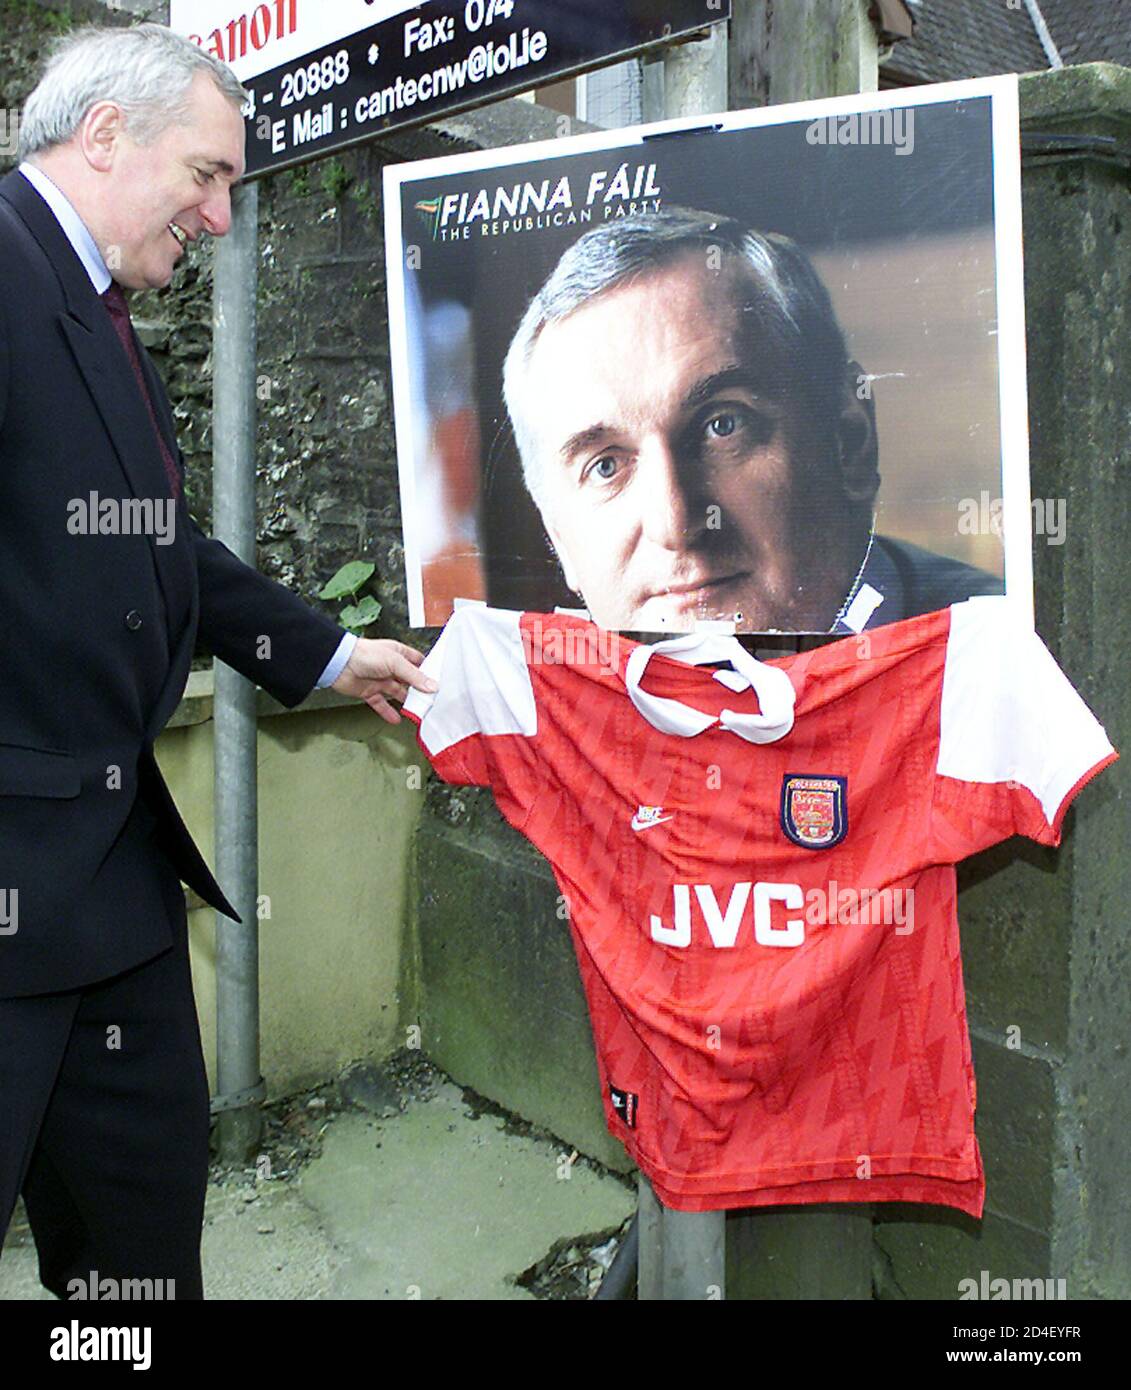 irish-prime-minister-taoiseach-bertie-ahern-laughs-at-spotting-one-of-his-election-posters-with-an-arsenal-football-club-top-in-letterkenny-county-donegal-republic-of-ireland-may-9-2002-ahern-is-canvassing-for-his-fianna-fail-party-ahead-of-the-irish-general-election-on-may-17-2002-reuterspaul-mcerlane-pmnmb-2D4EYFR.jpg